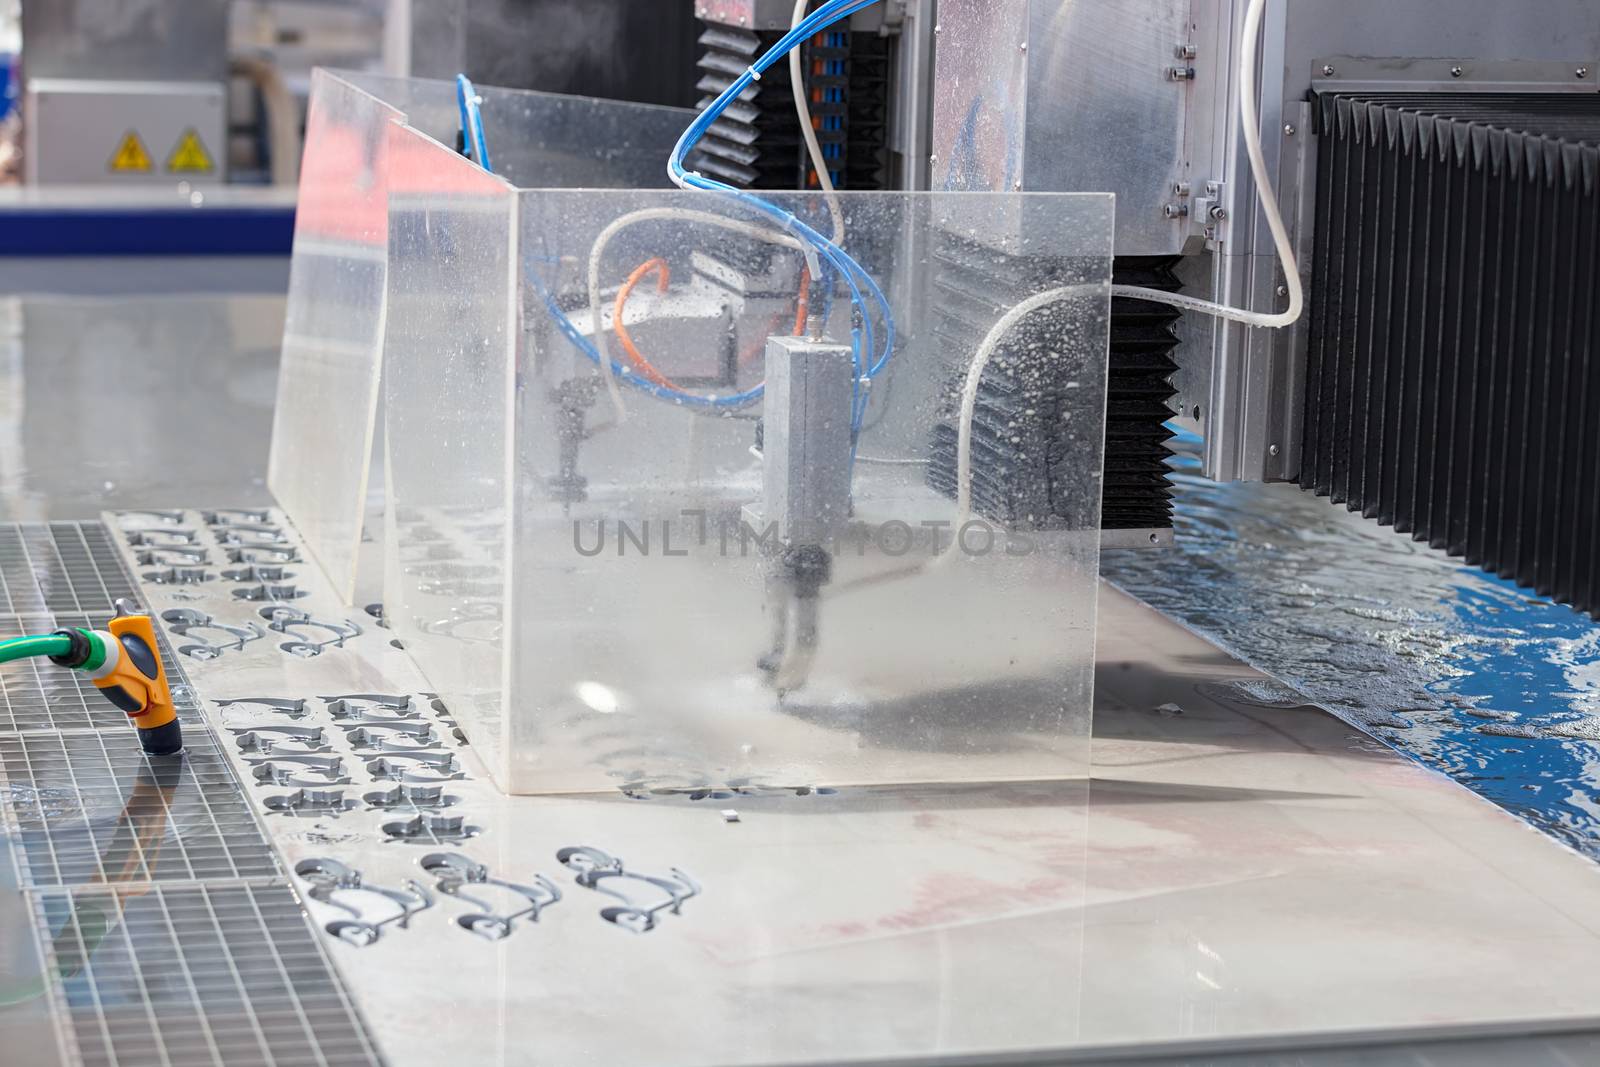 cnc water jet machine for  metalworking, note shallow depth of field